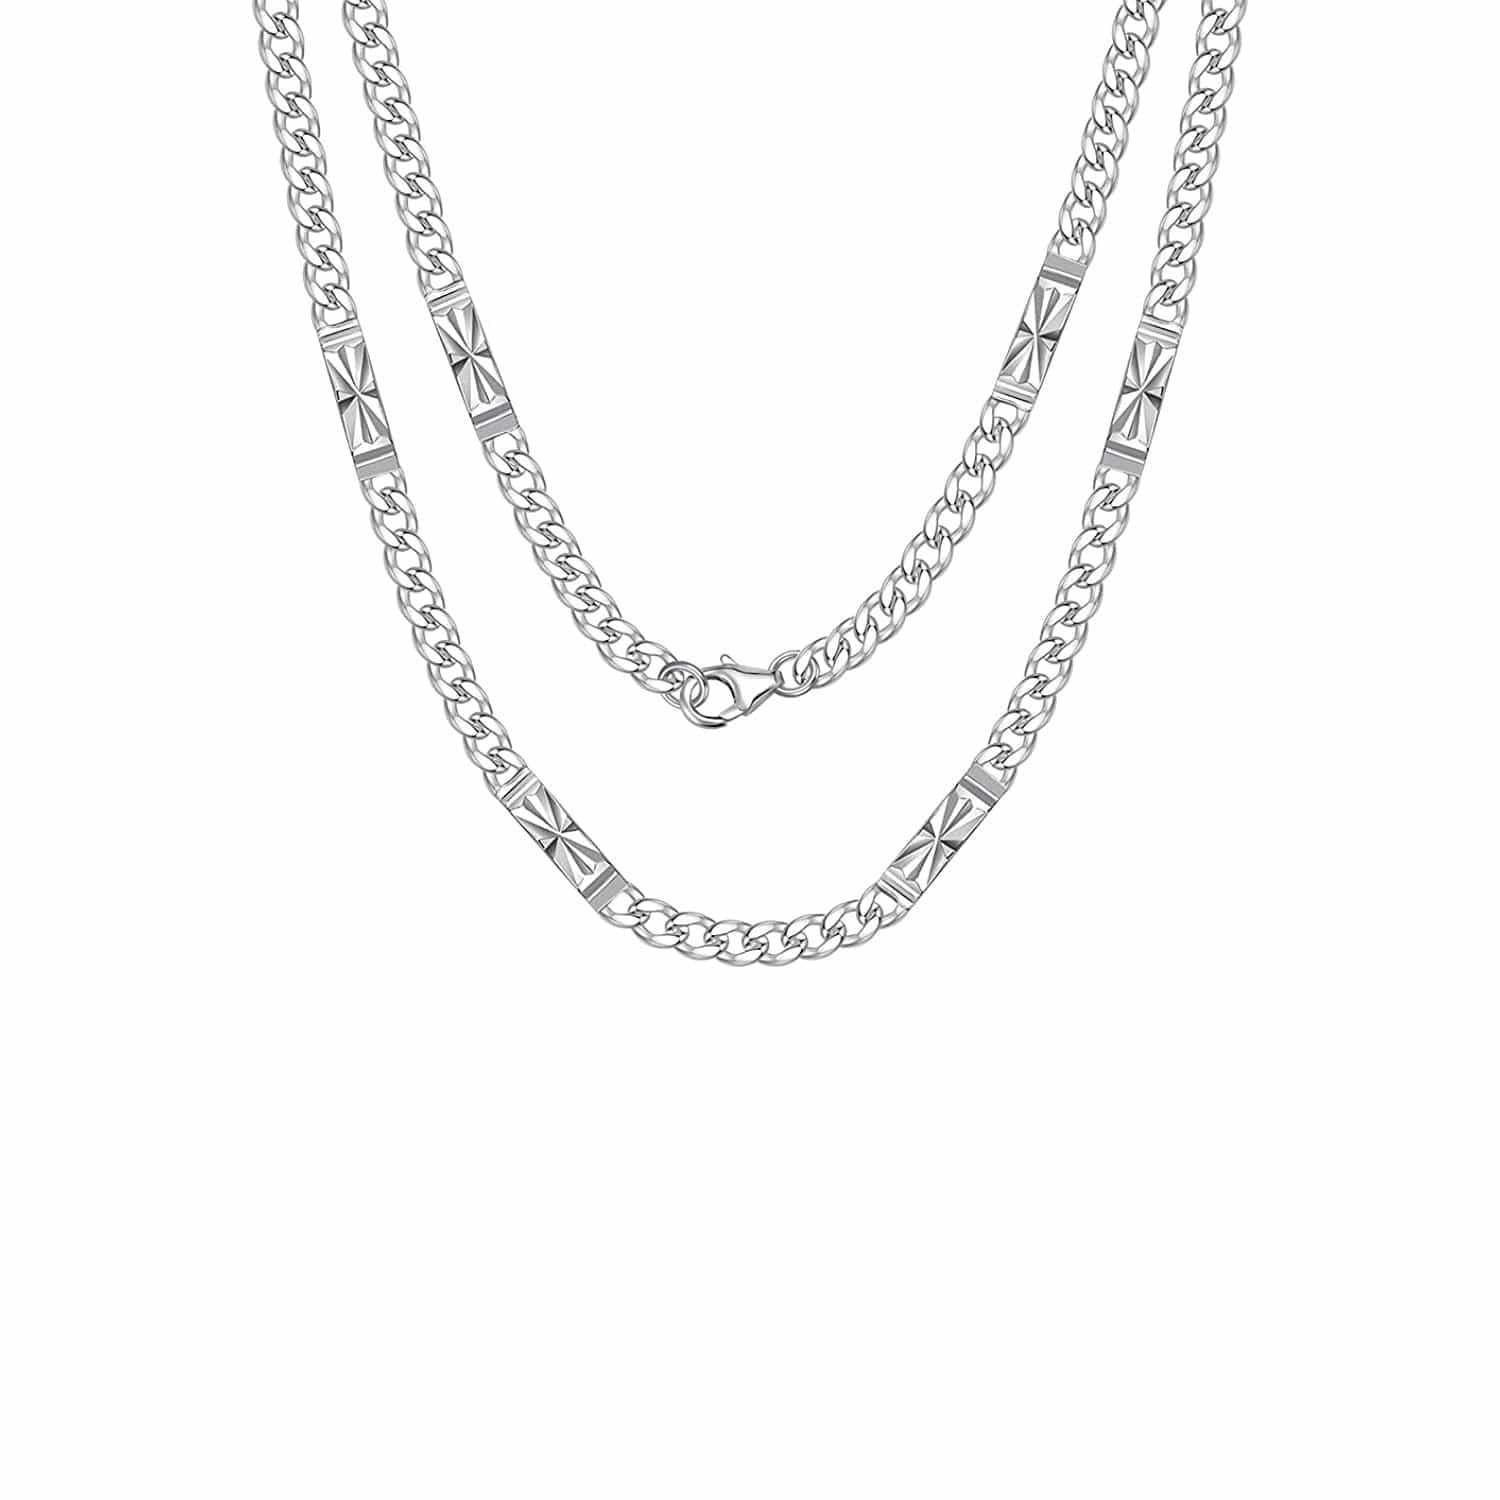 Mens Sterling Silver Cuban Link Chain 20 inches